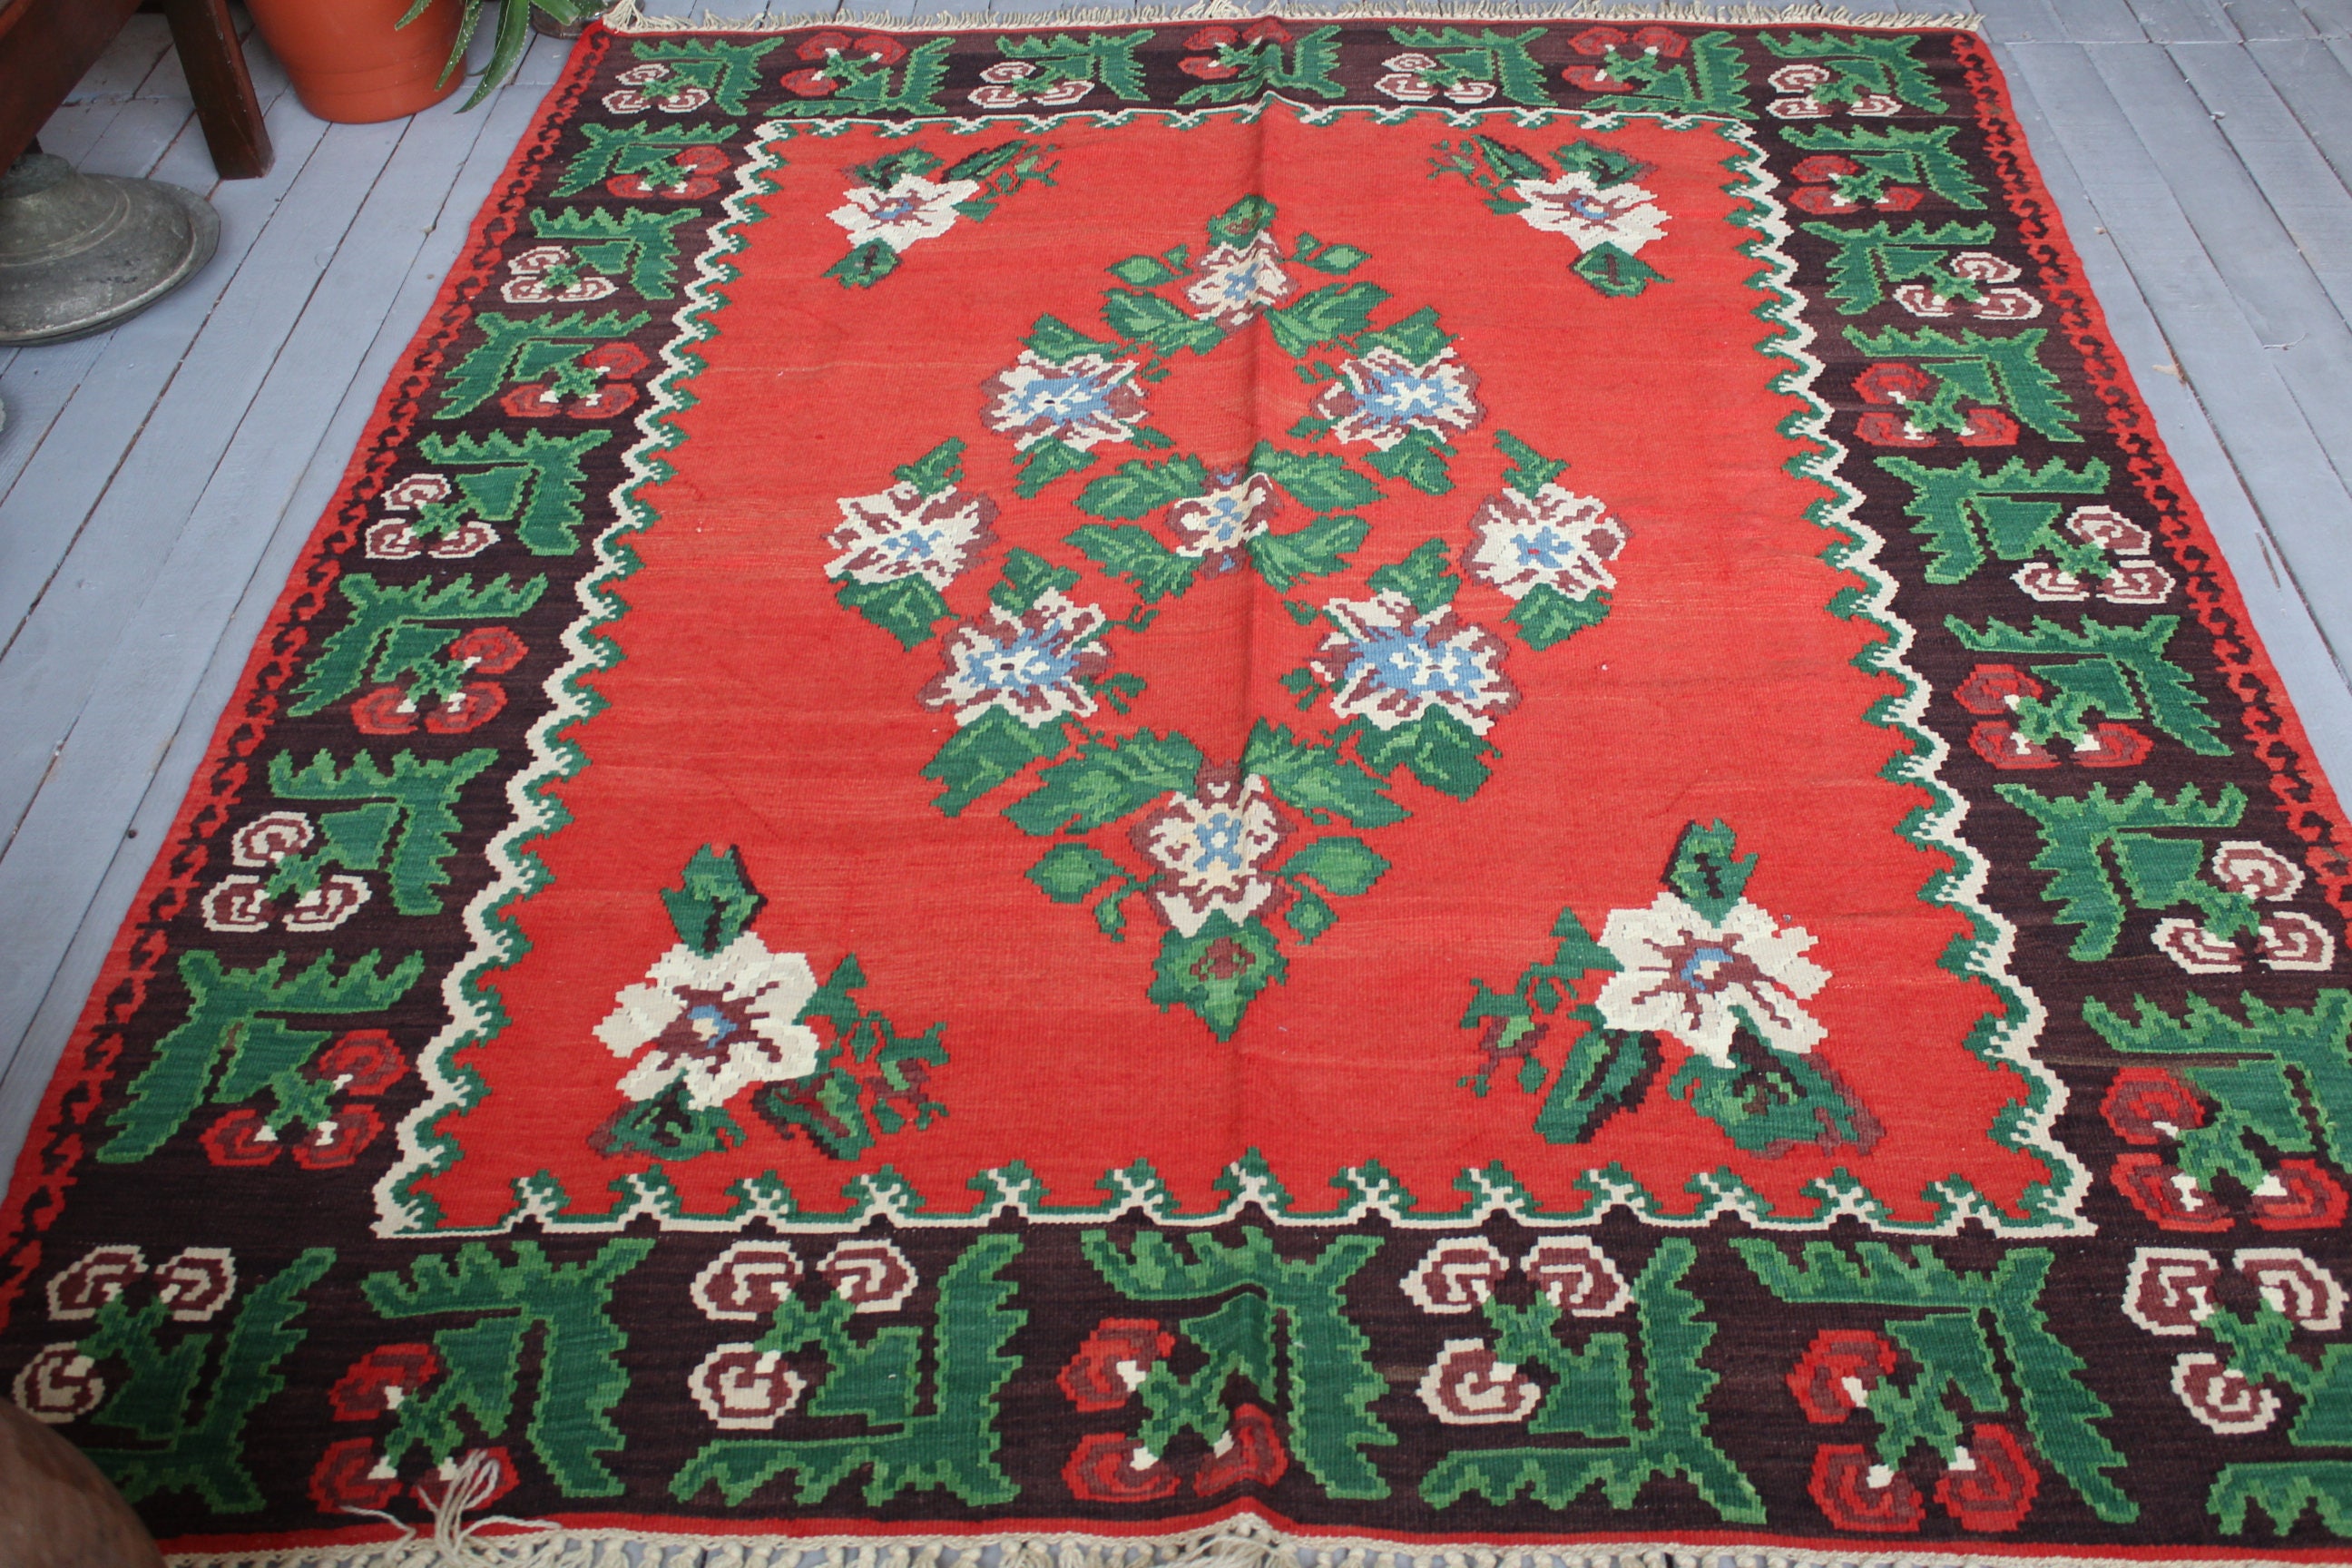 5'6x6'6 Vintage Bohemian Ethnic Handwoven Wool Red Area Floral Kilim Rug"